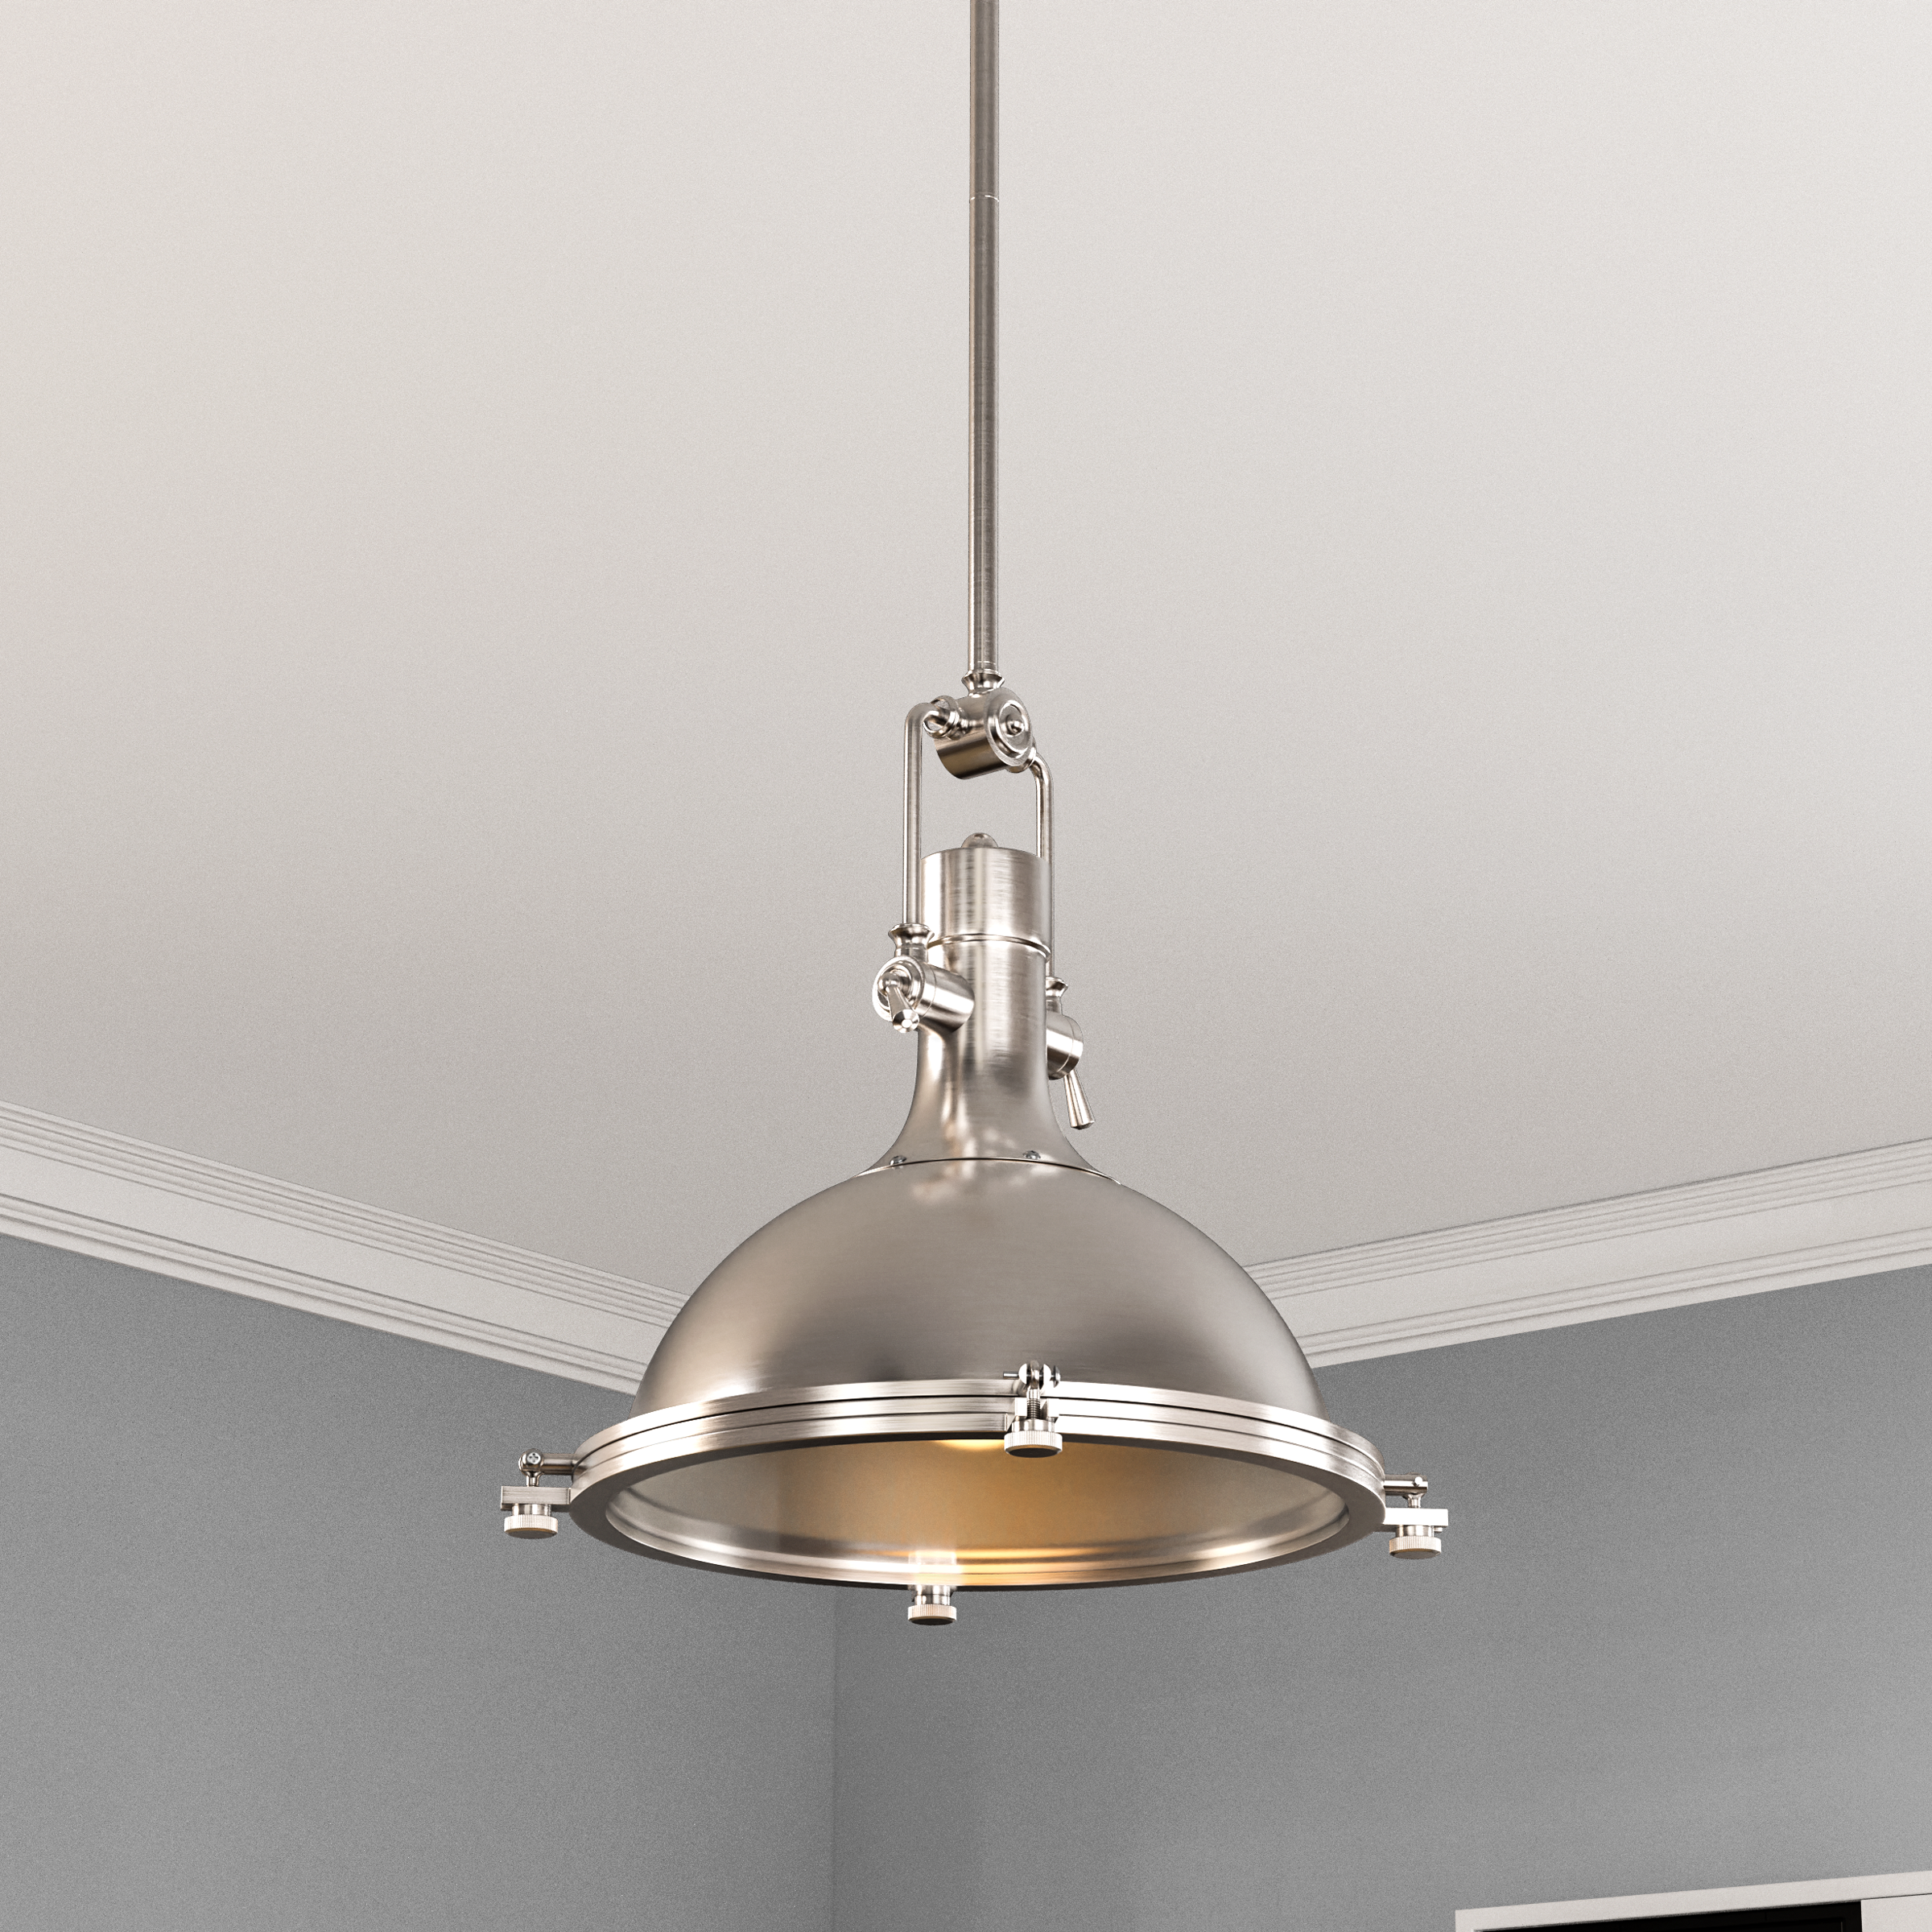 Industrial Pendant Light Fixture, Satin Nickel Finish, Dome Shape, Includes Extension Rods 1x6"+3x12", E26 Base